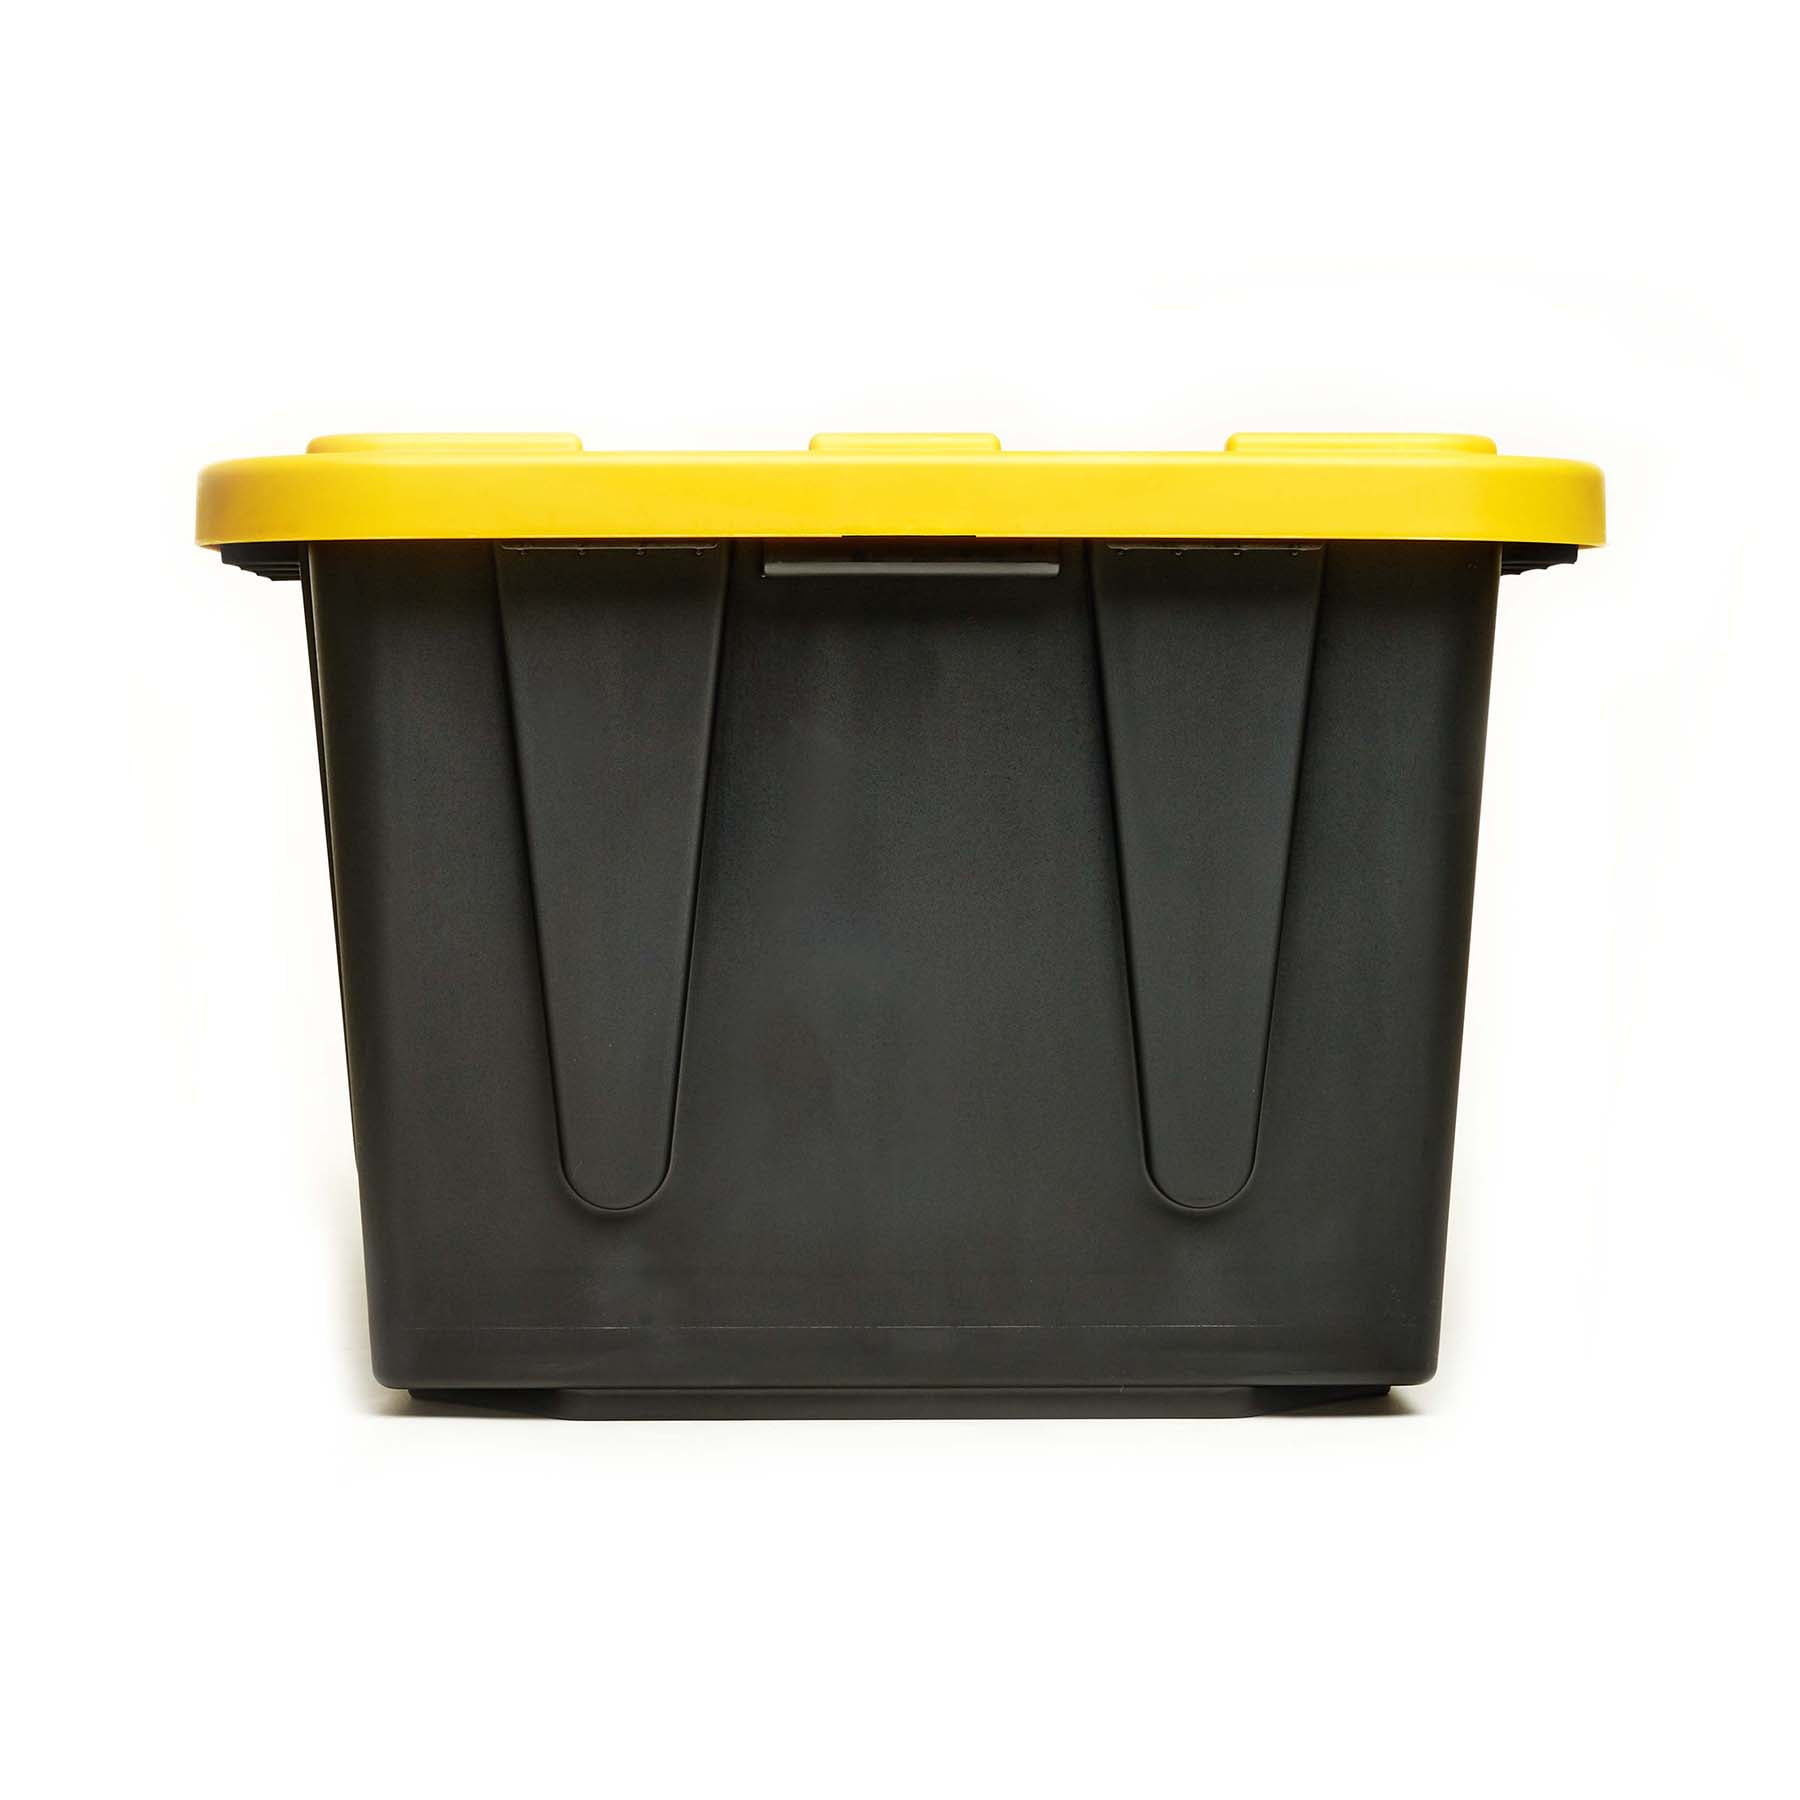 Modern Homes 0.5 gal. Large Storage Box Translucent in Gray Bin with Yellow Handles with Cover